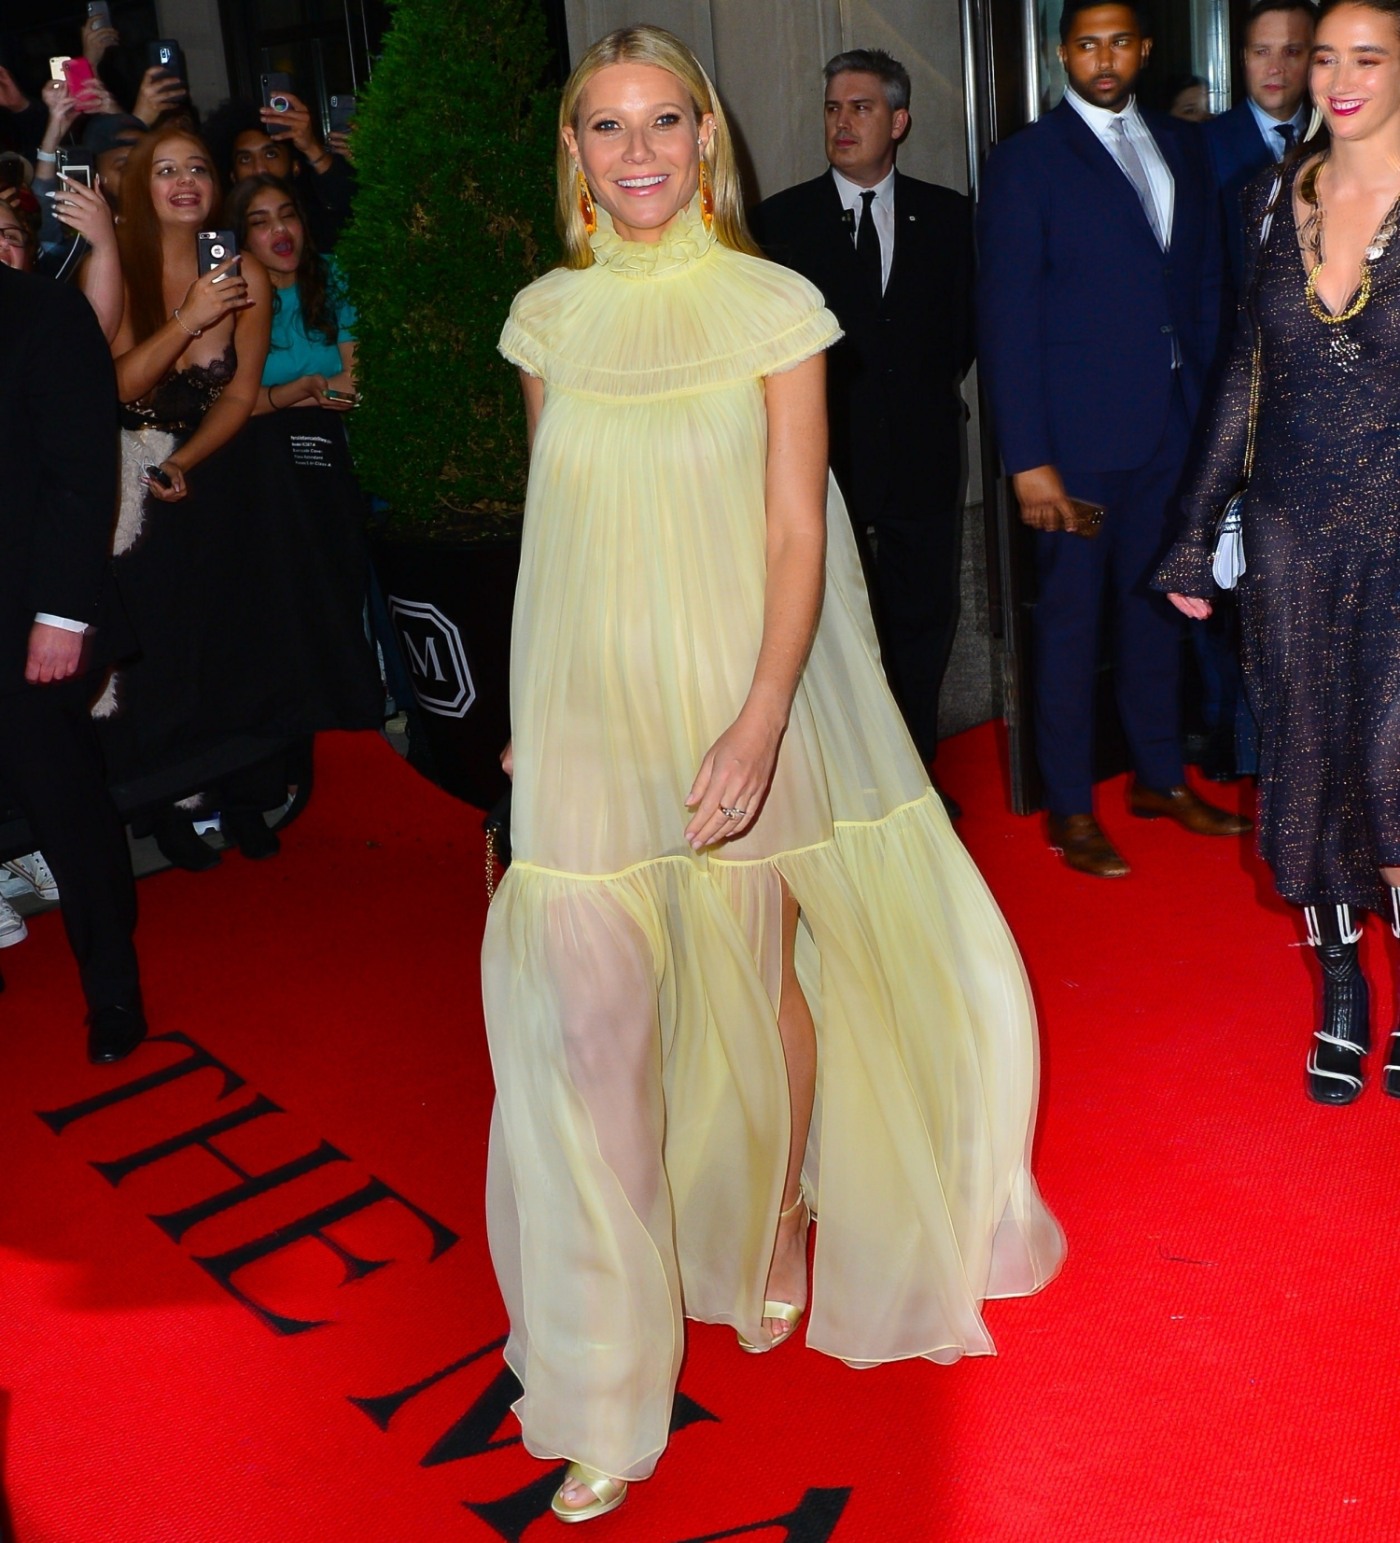 Gwyneth Paltrow steps out for Met Gala in gold